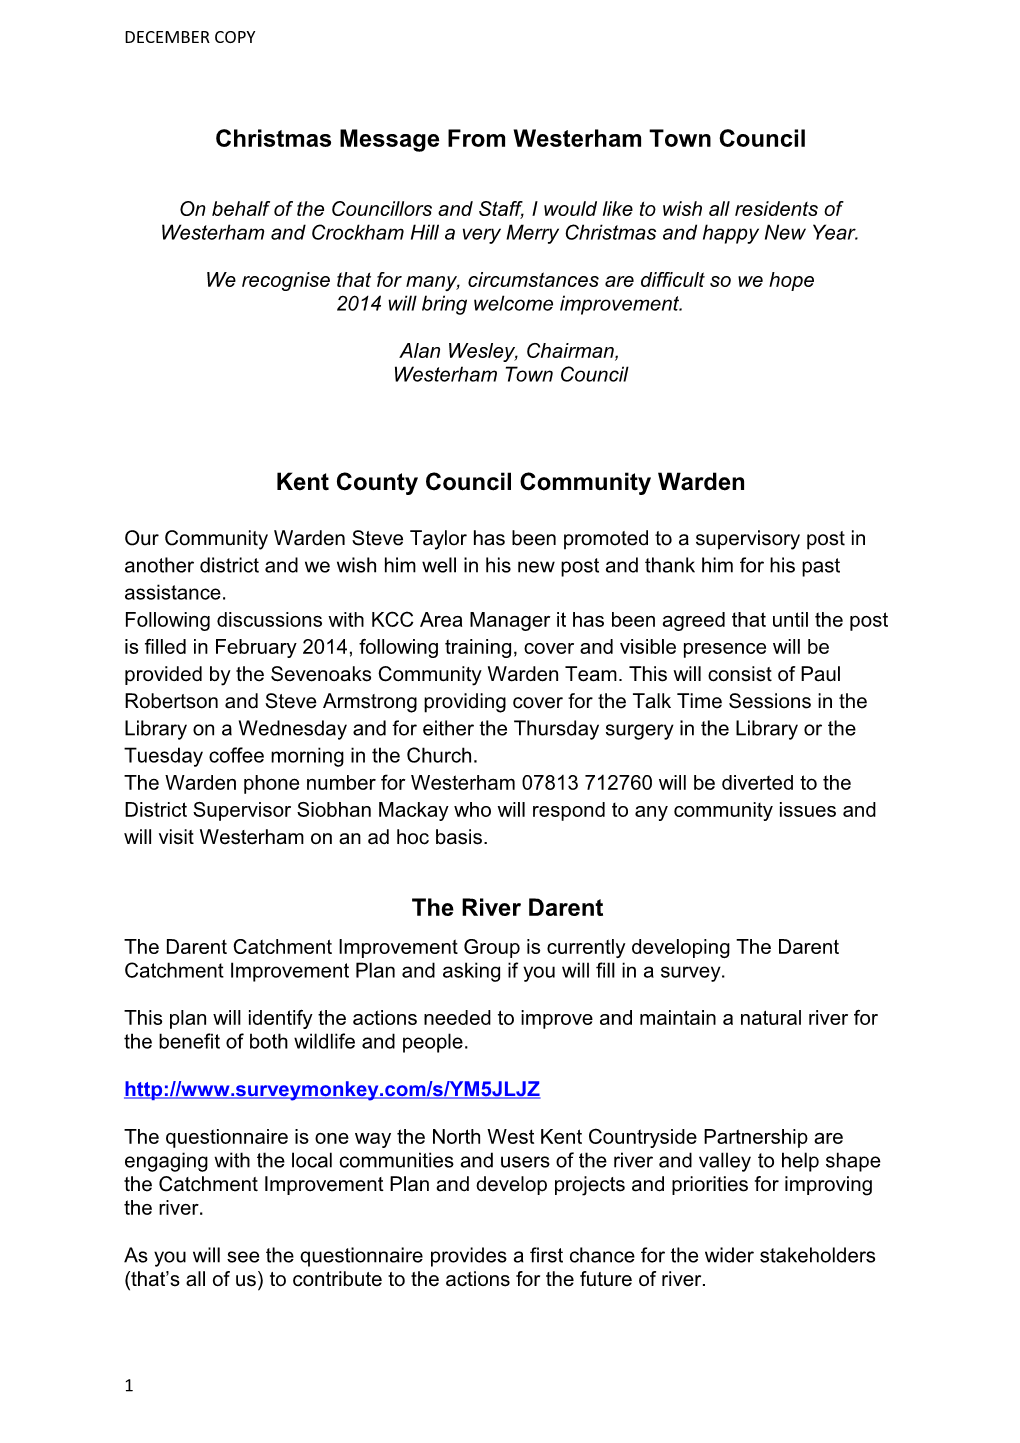 Christmas Message from Westerham Town Council